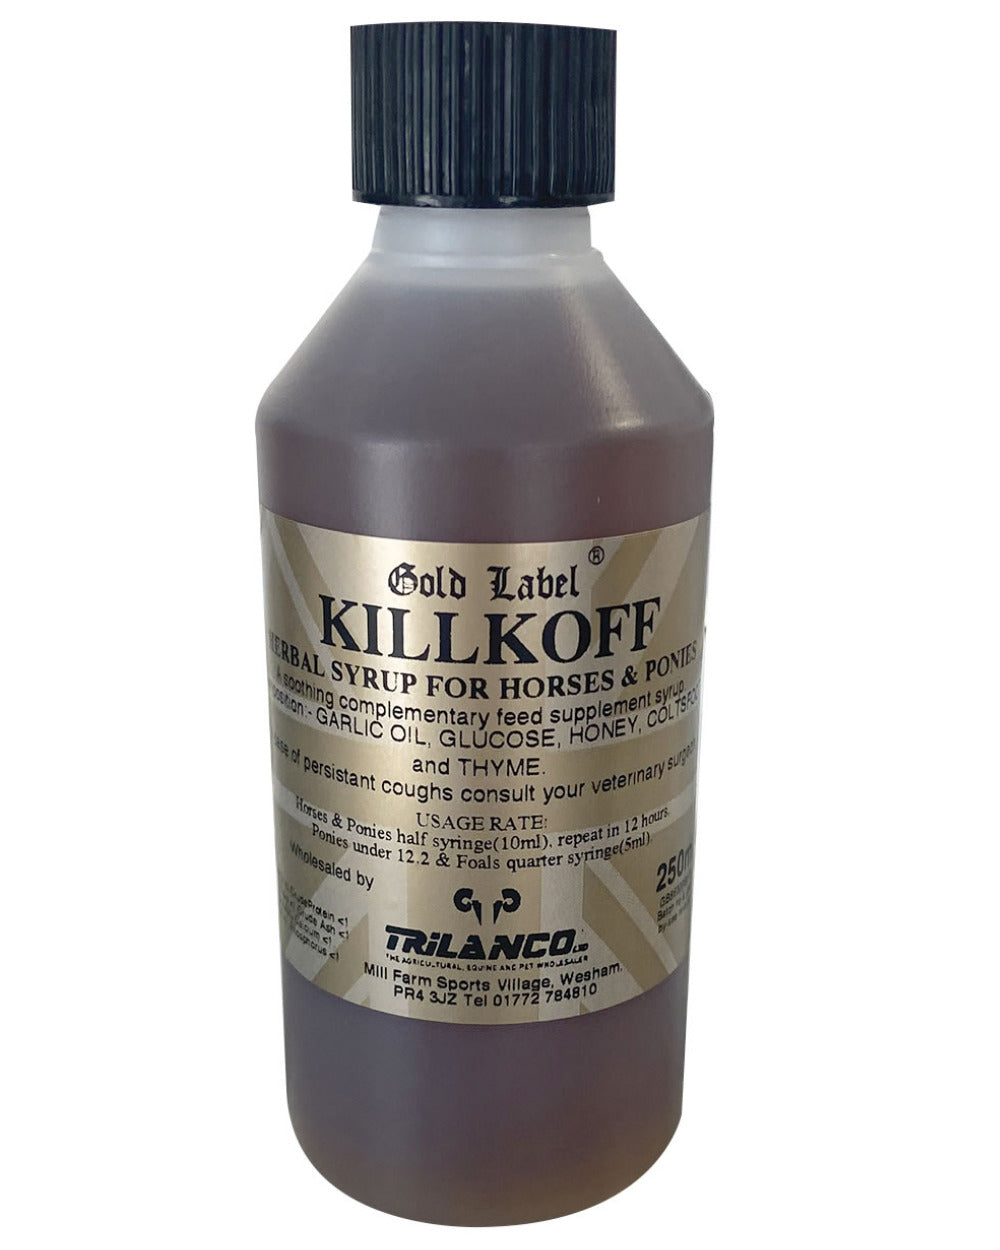 Gold Label Killkoff Herbal Syrup On A White Background